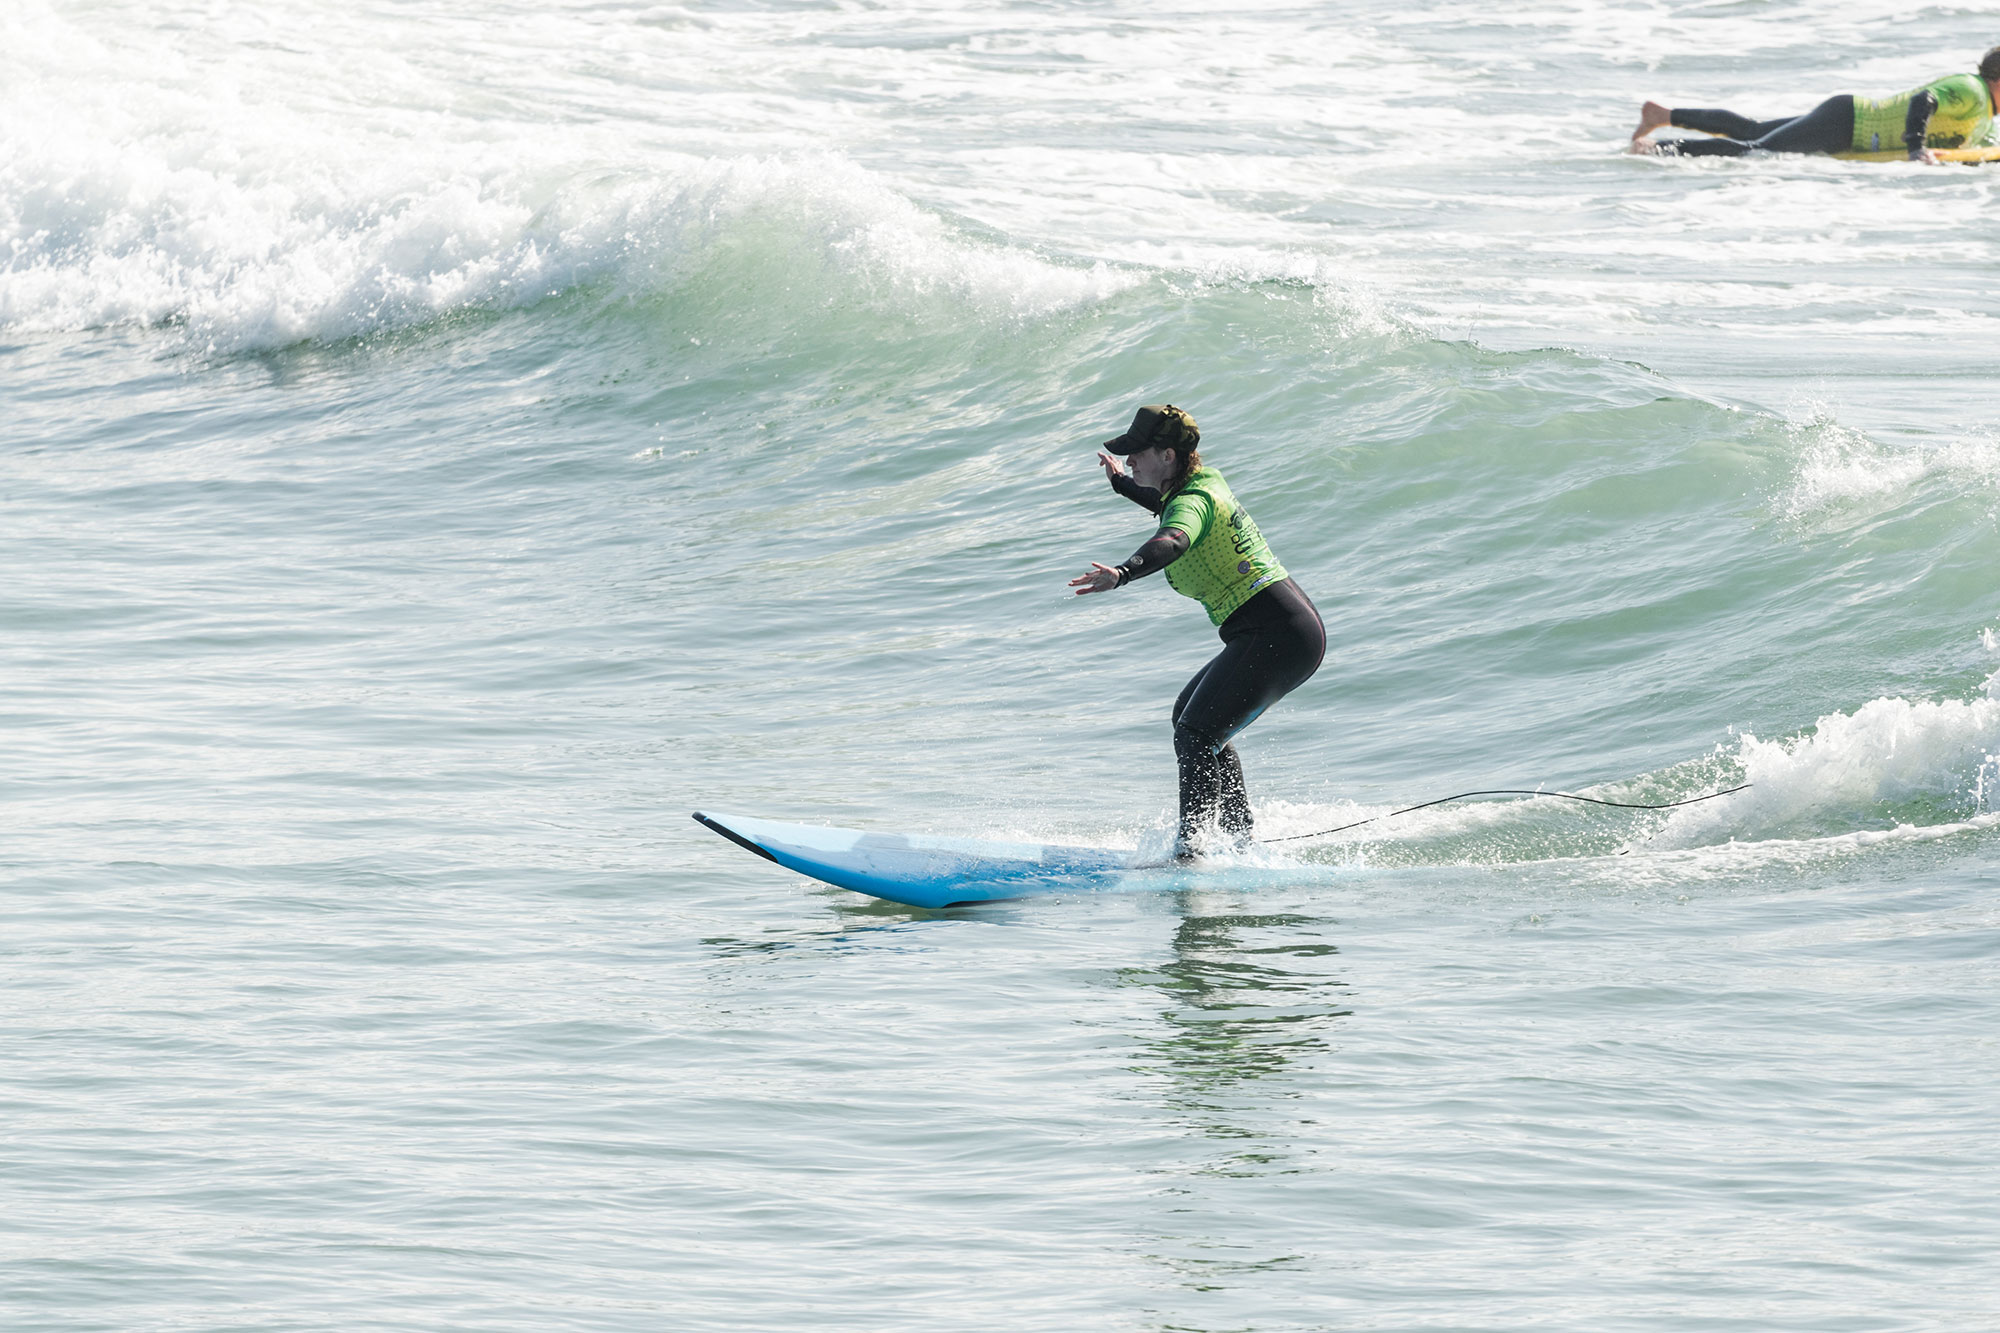 stephanie, veteran, riding a wave with operation surf